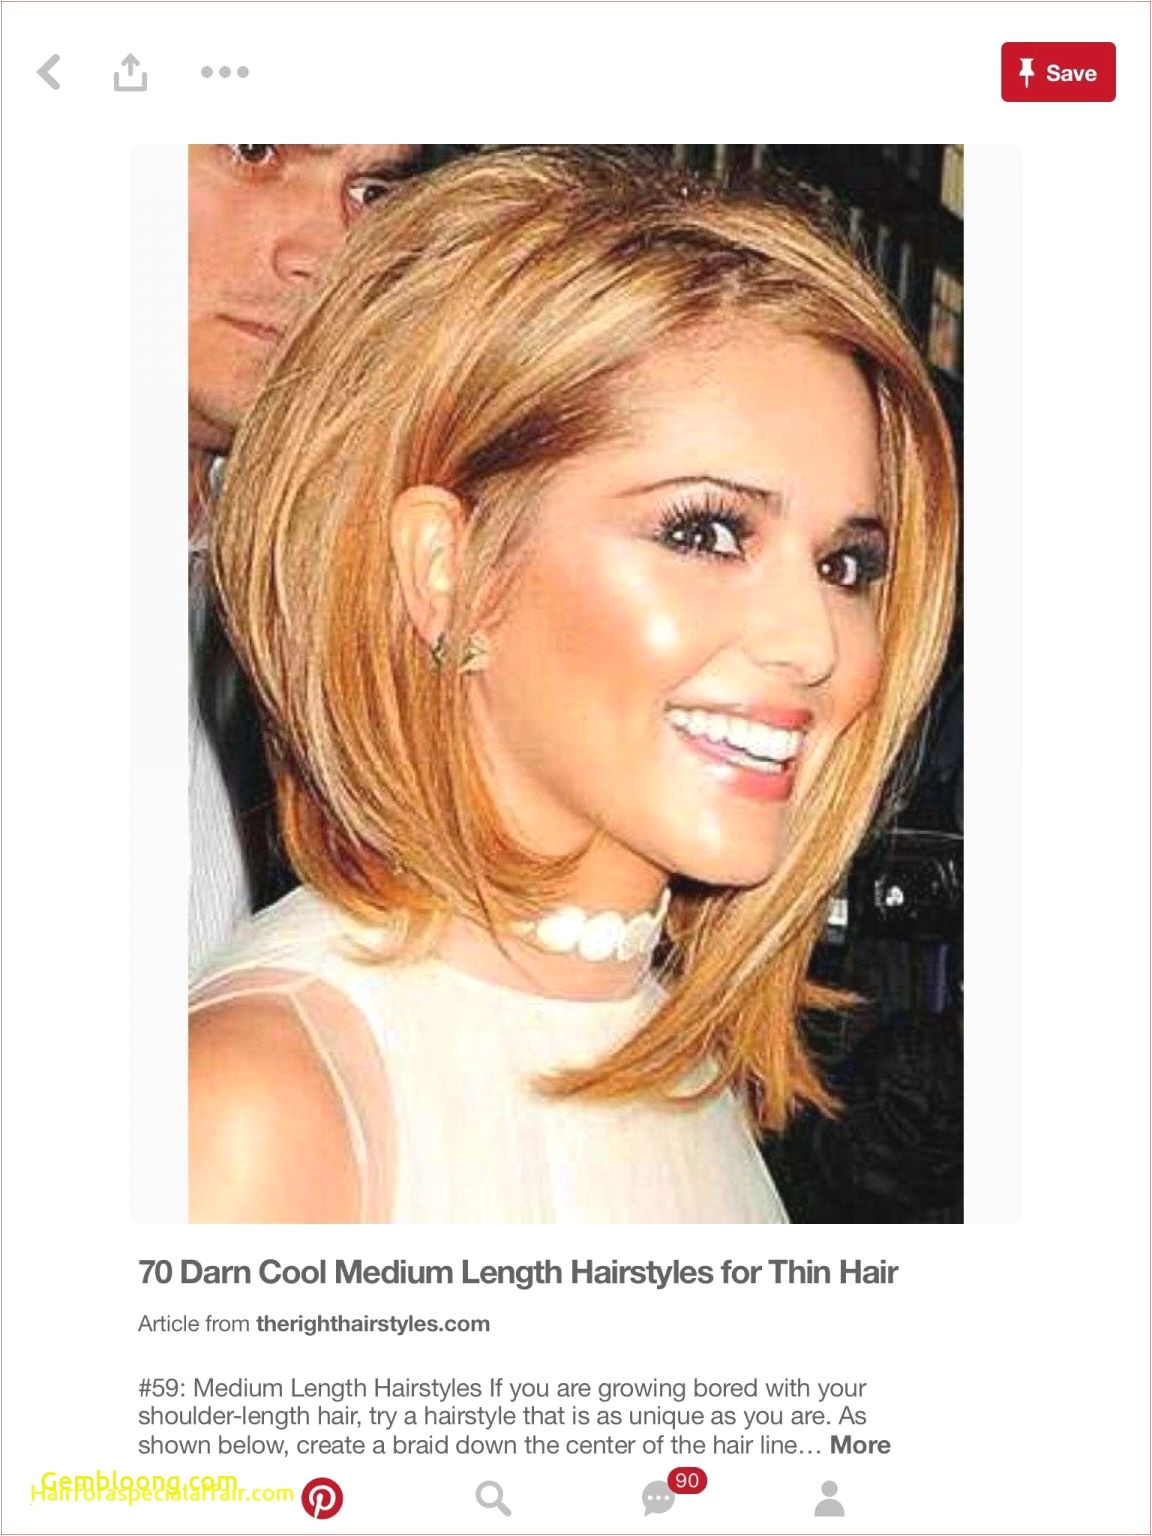 Hairstyles for Hair Down to Your Shoulders form